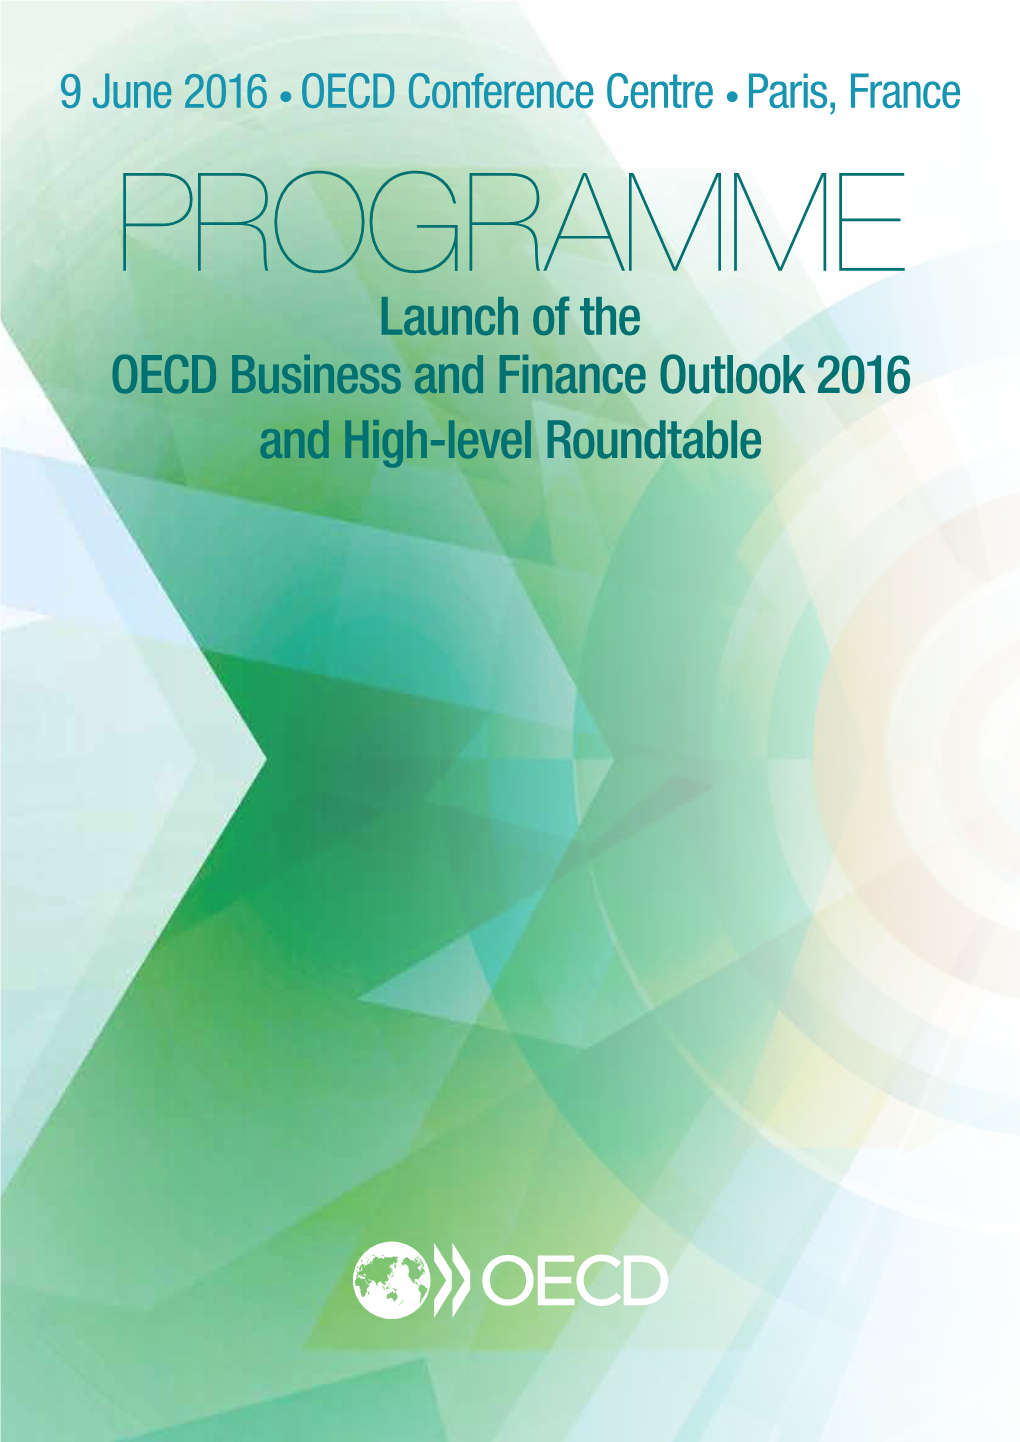 Launch of the OECD Business and Finance Outlook 2016 and High-Level Roundtable